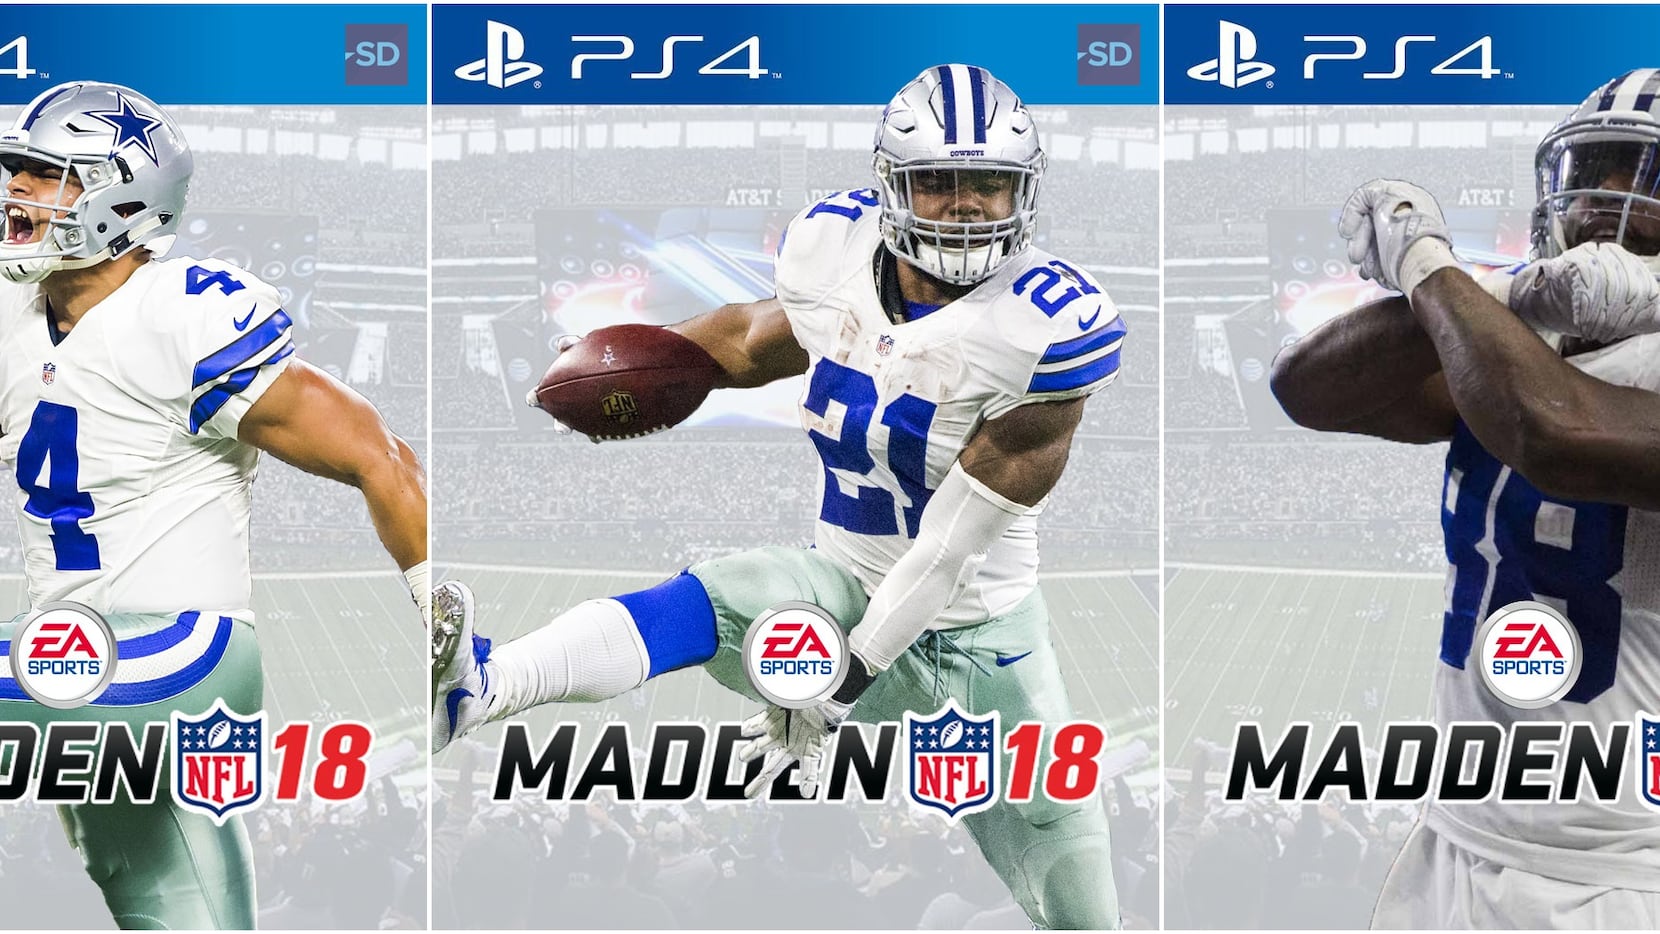 Tom Brady may be the Madden cover athlete, but here are some